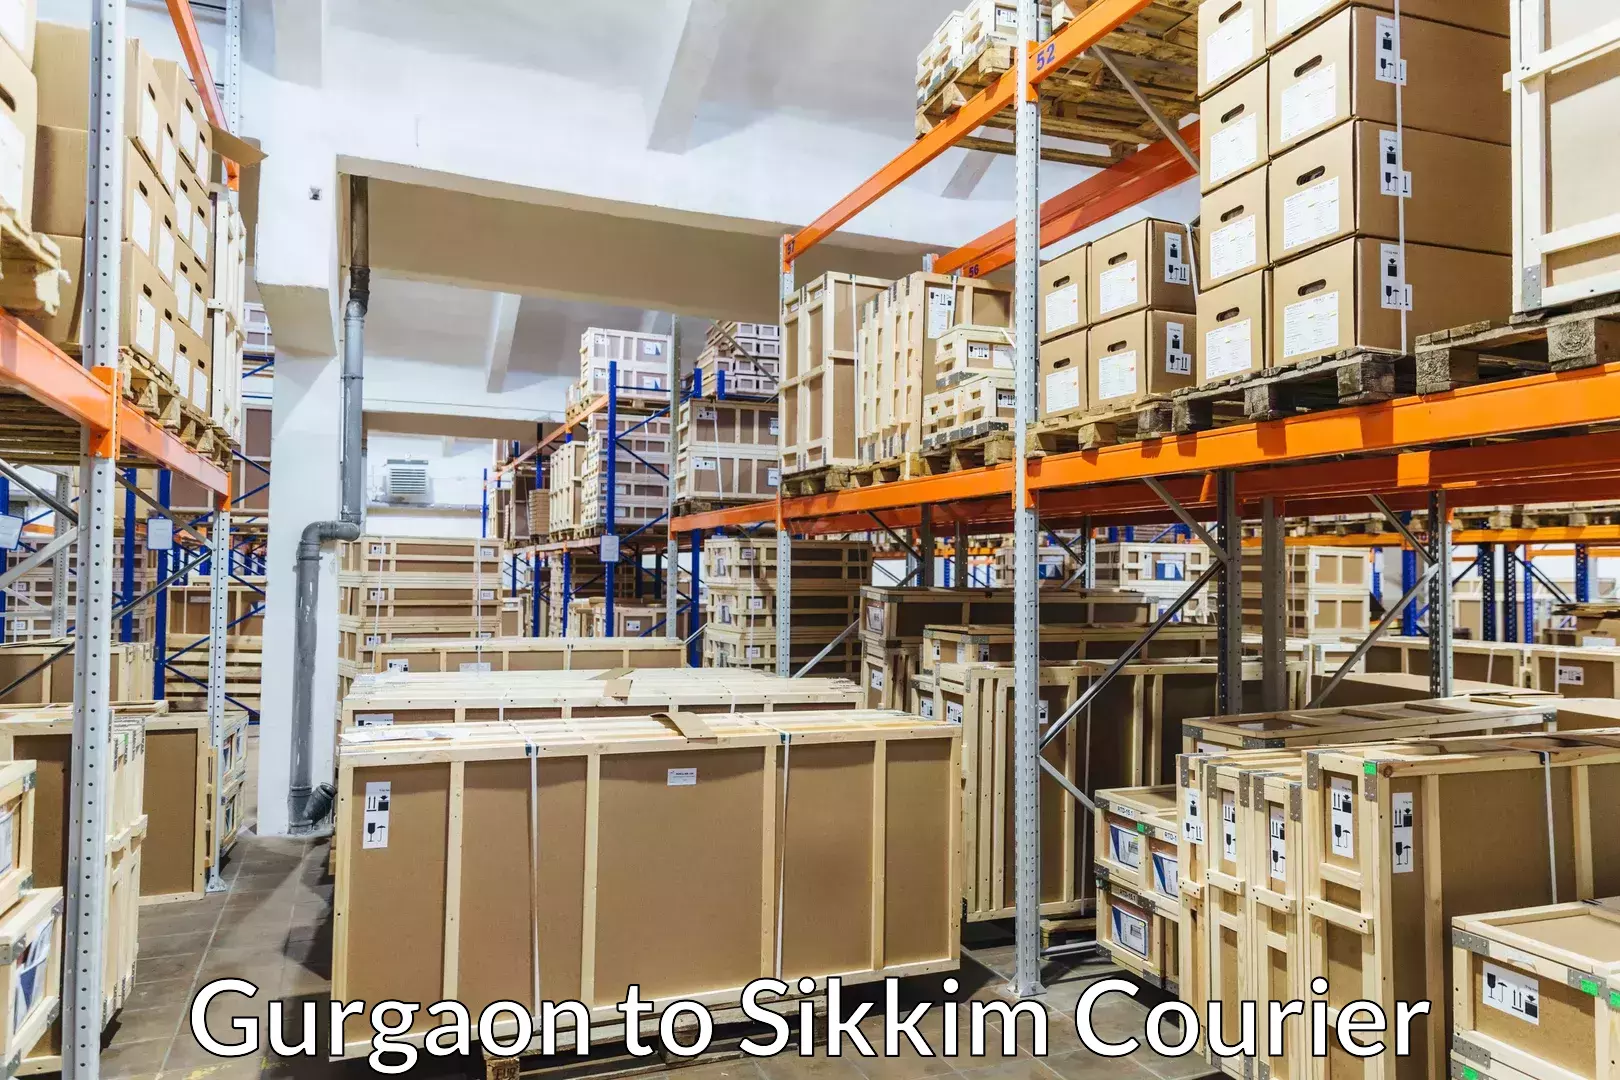 Luggage shipment specialists Gurgaon to North Sikkim